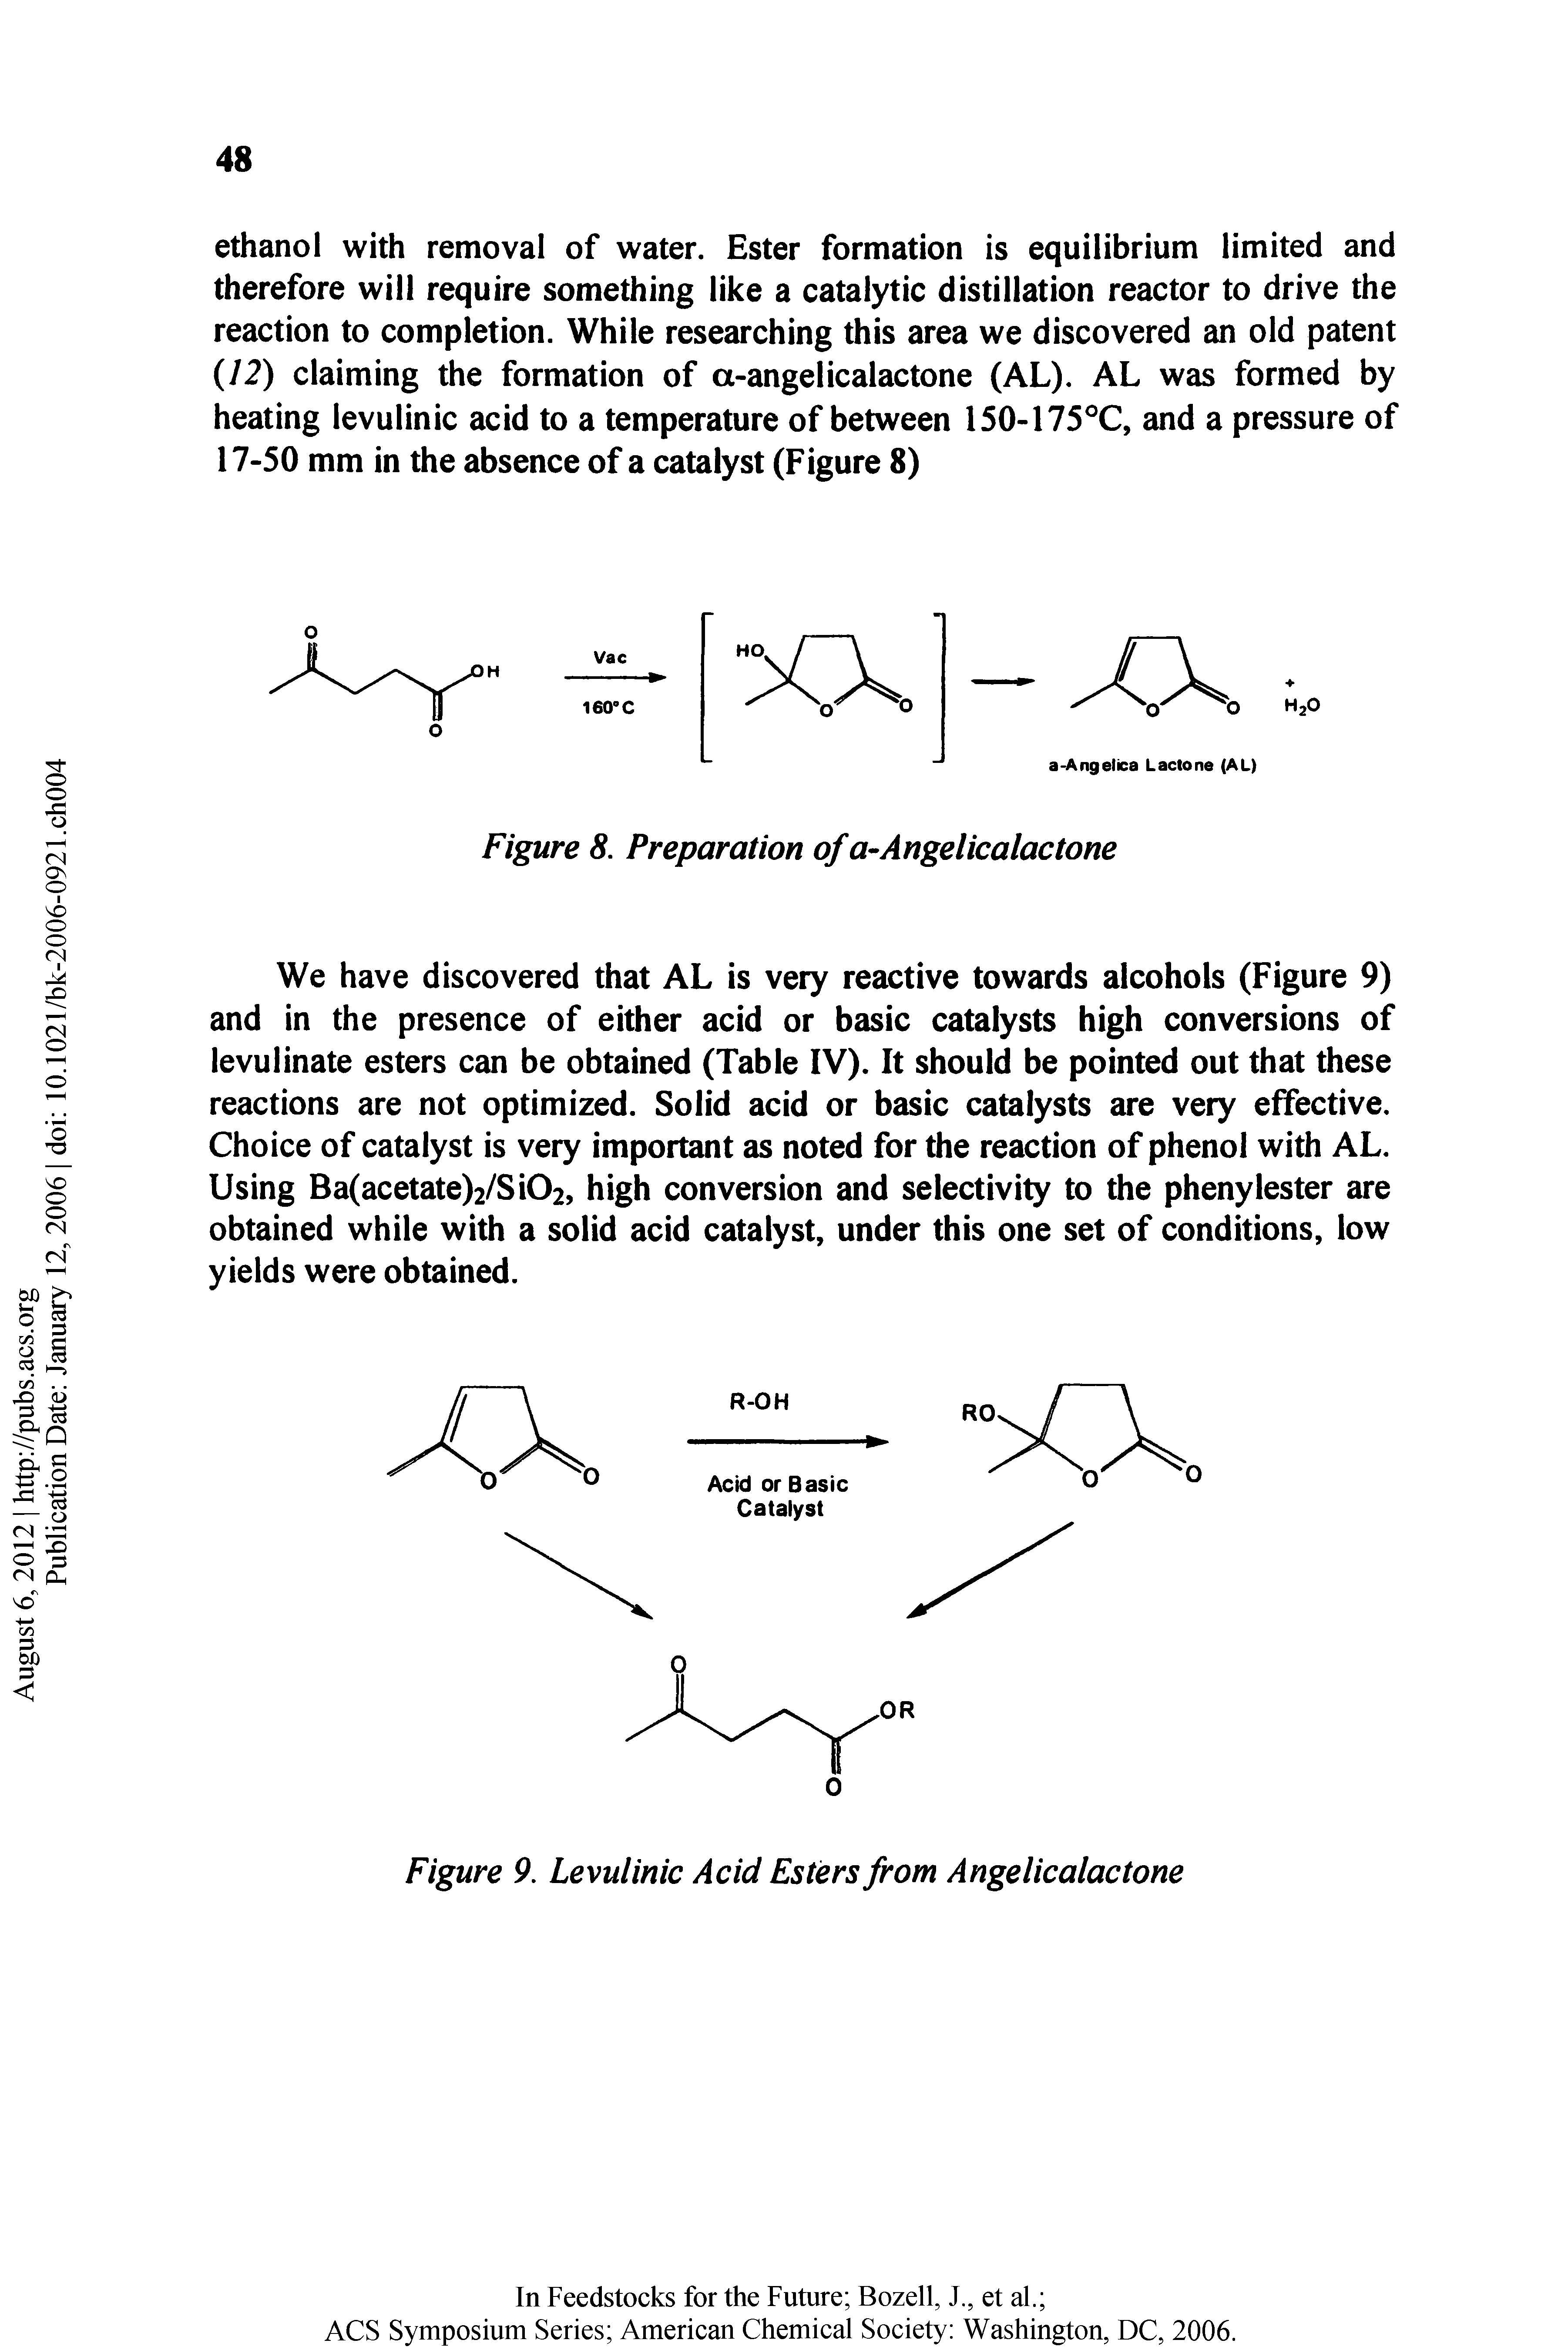 Figure 9. Levulinic Acid Esters from Angelicalactone...